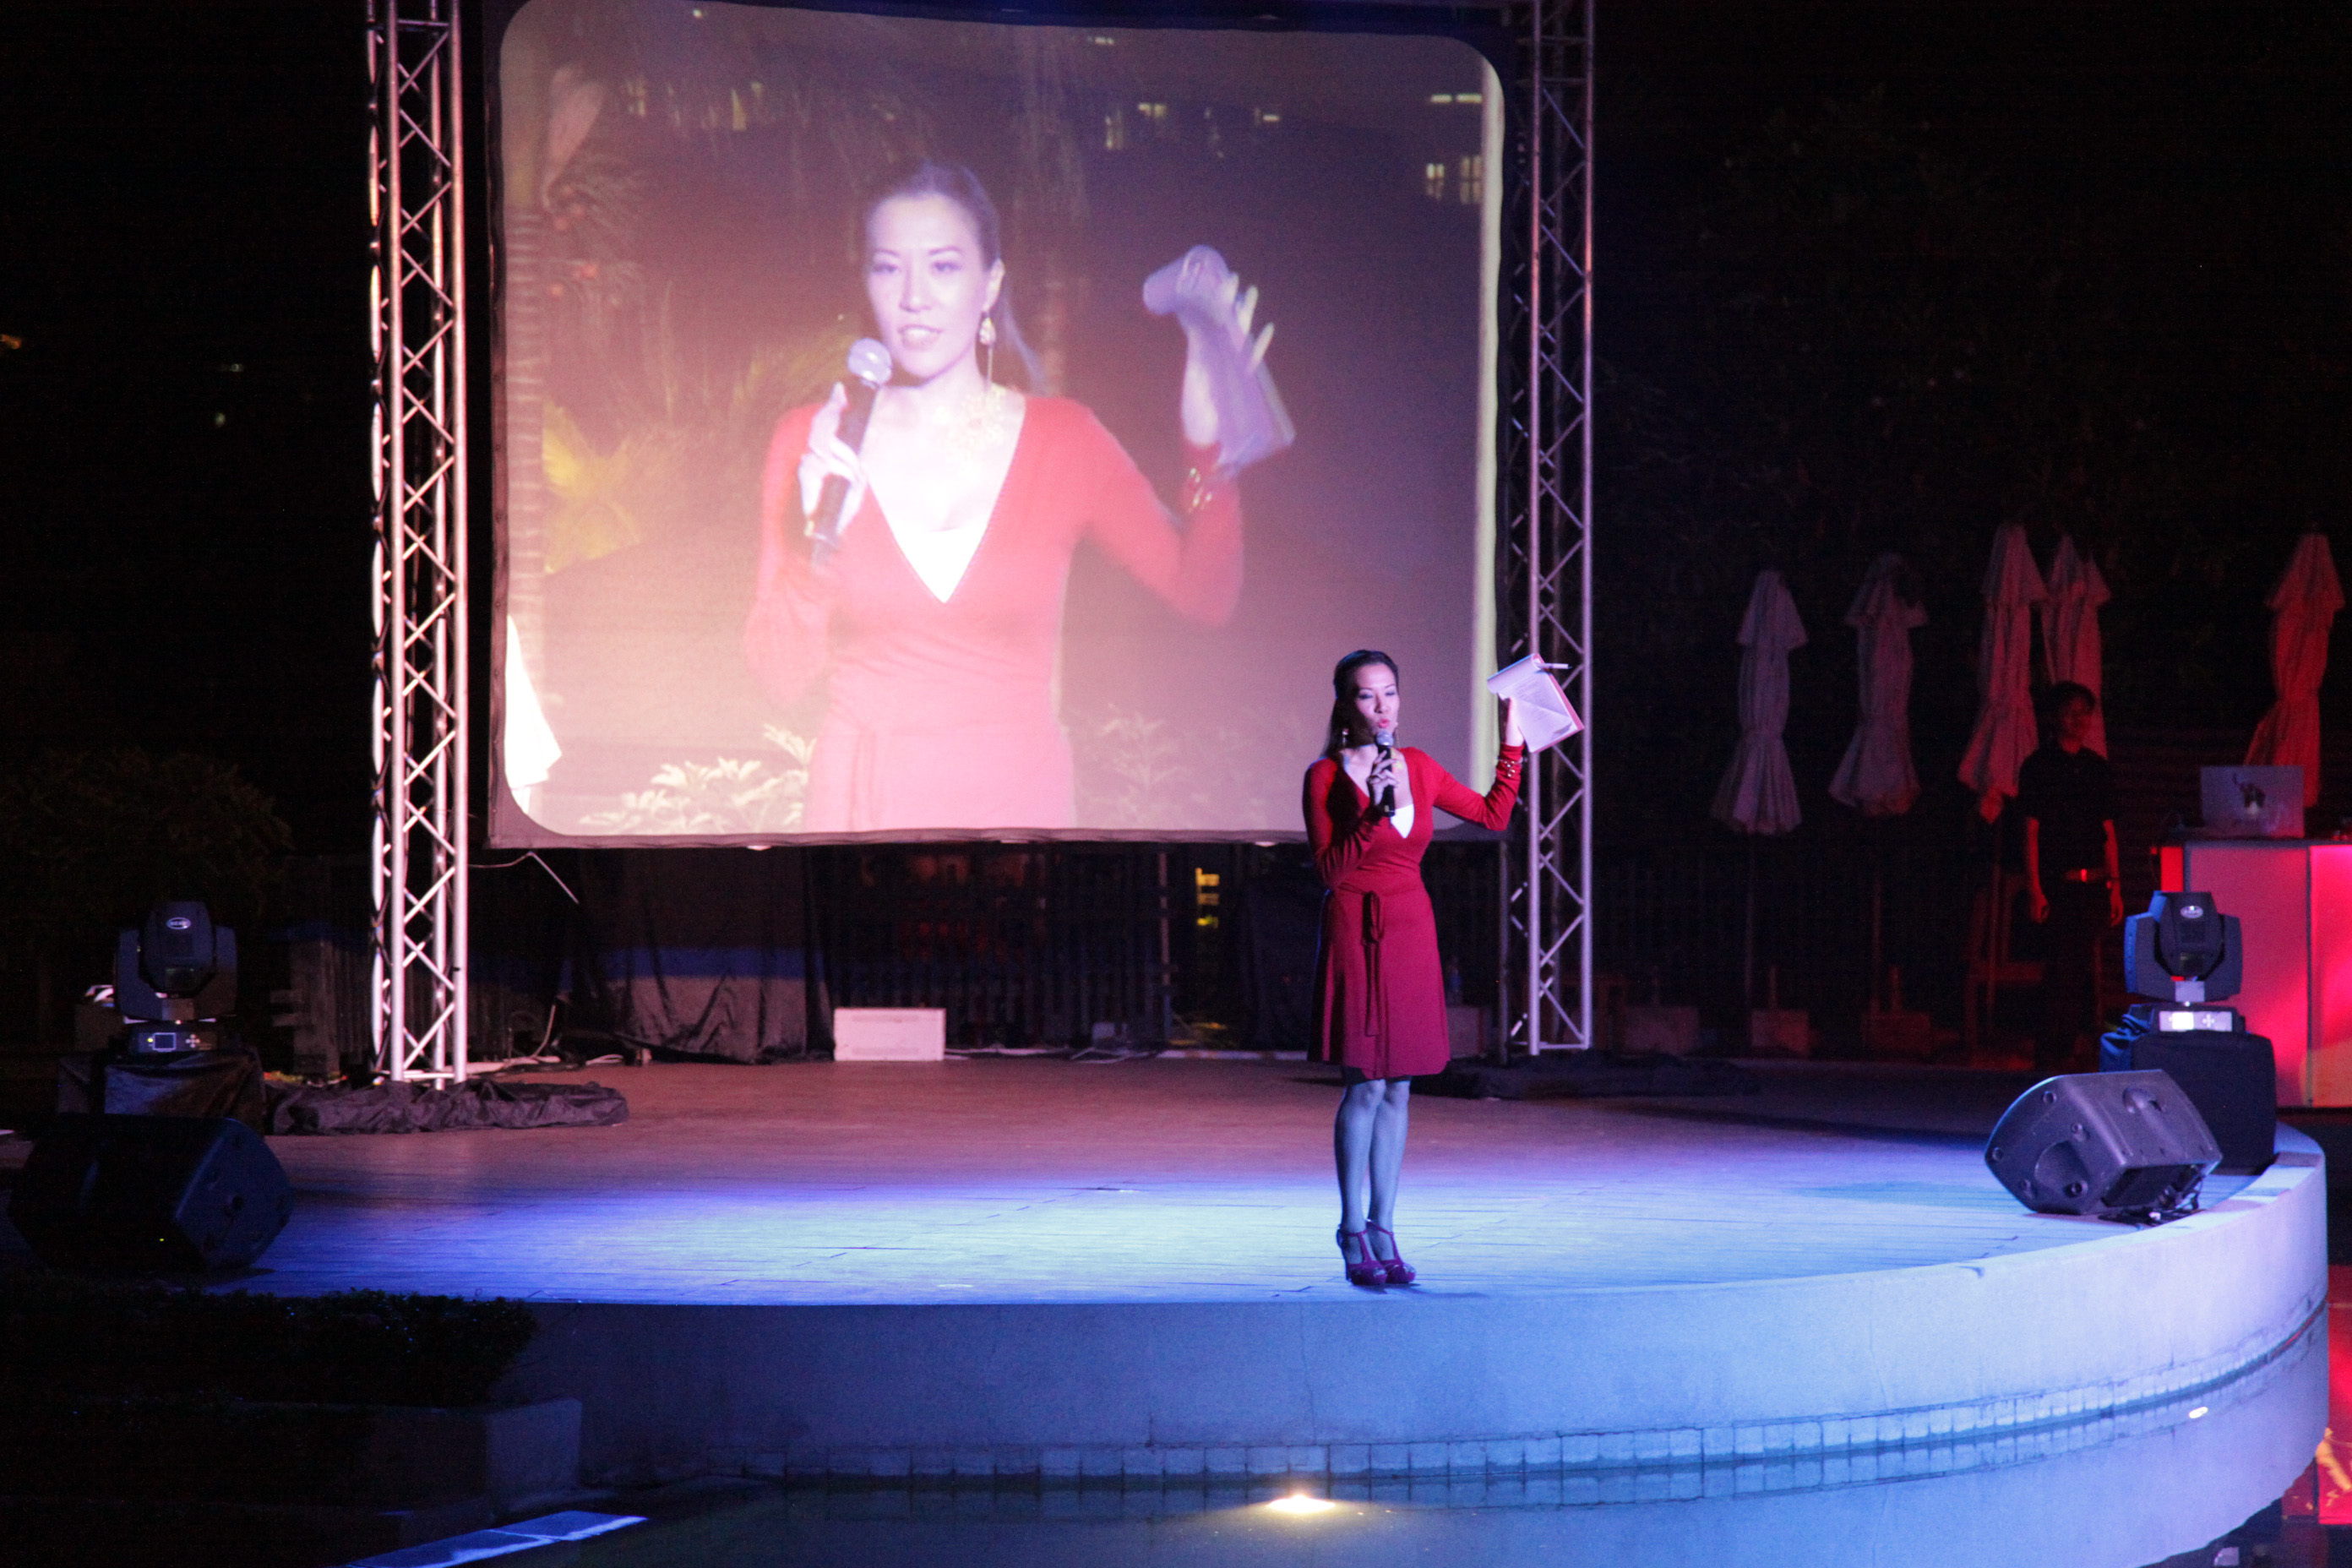 Ms. Able hosting the annual awards dinner for the HSBC Group on one of the 2-night event.